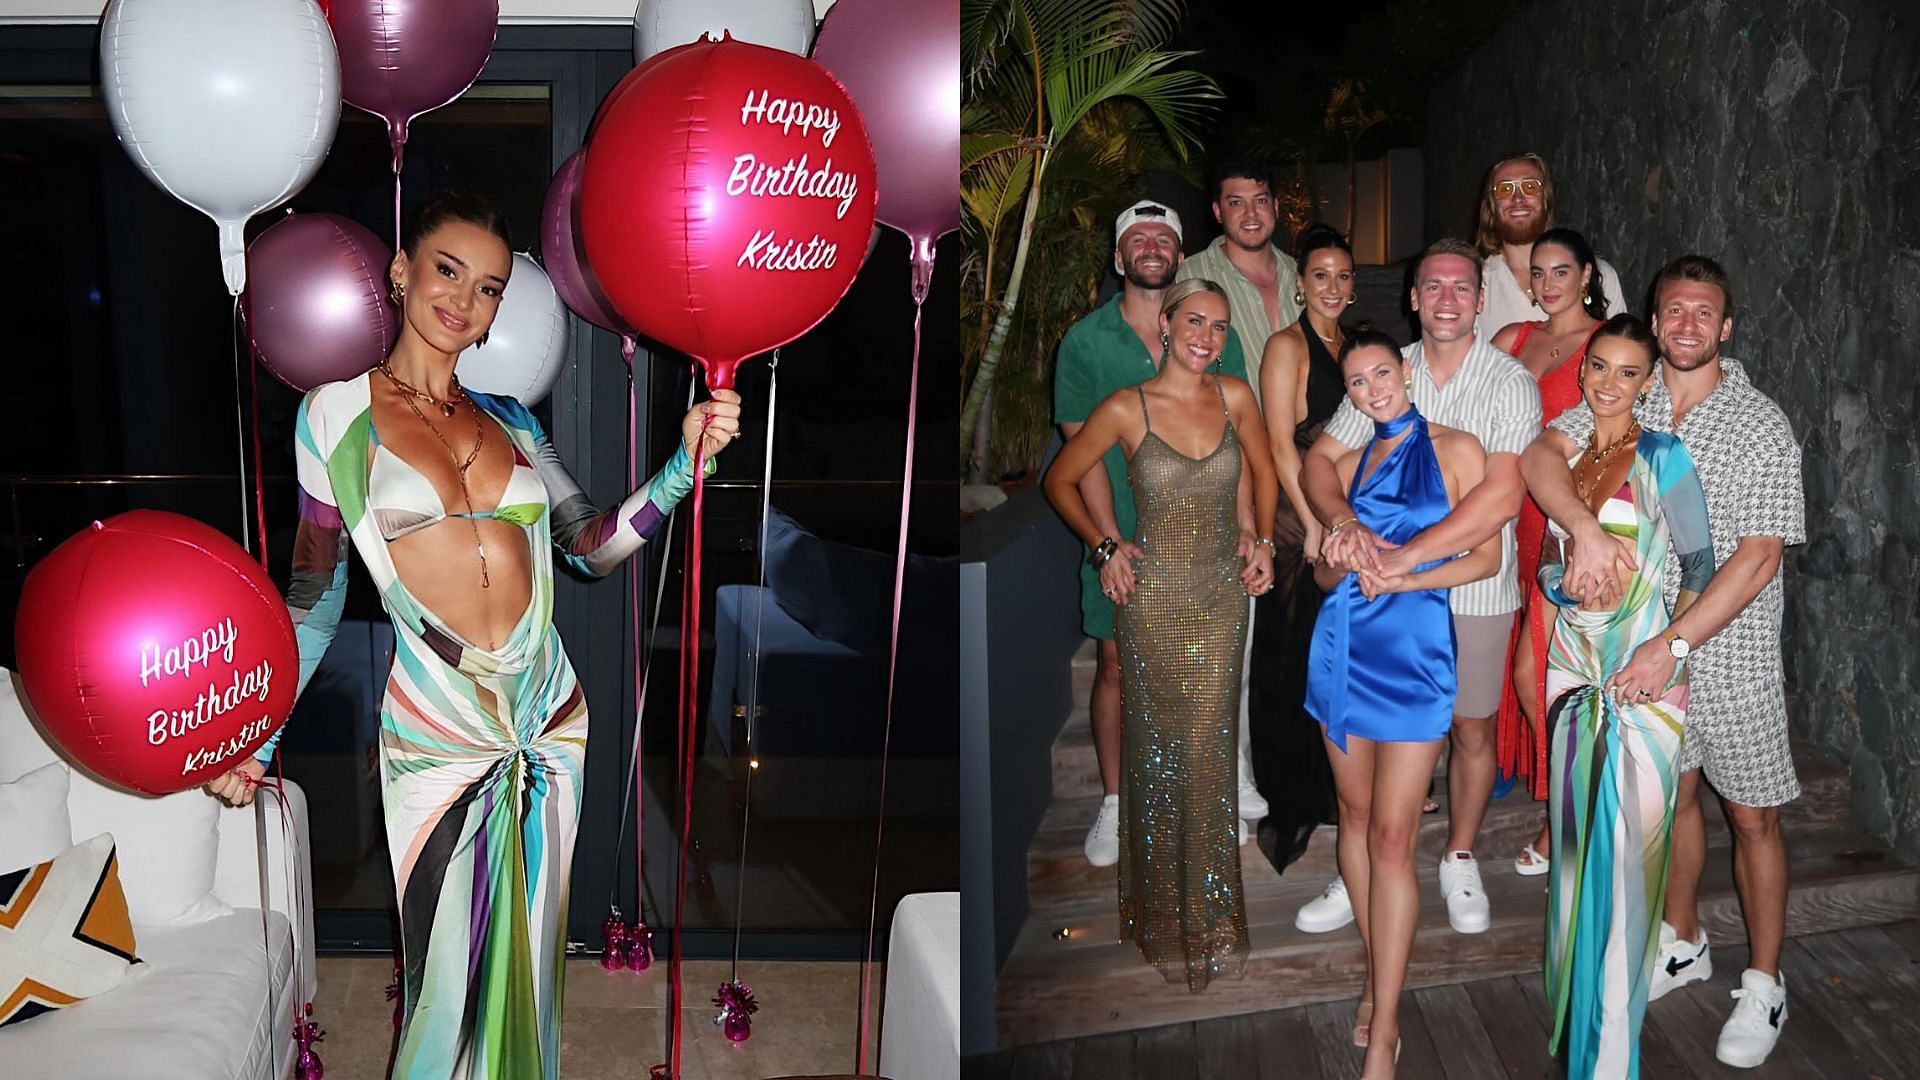 Kristin Juszczyk celebrated her 30th birthday with husband Kyle and friends